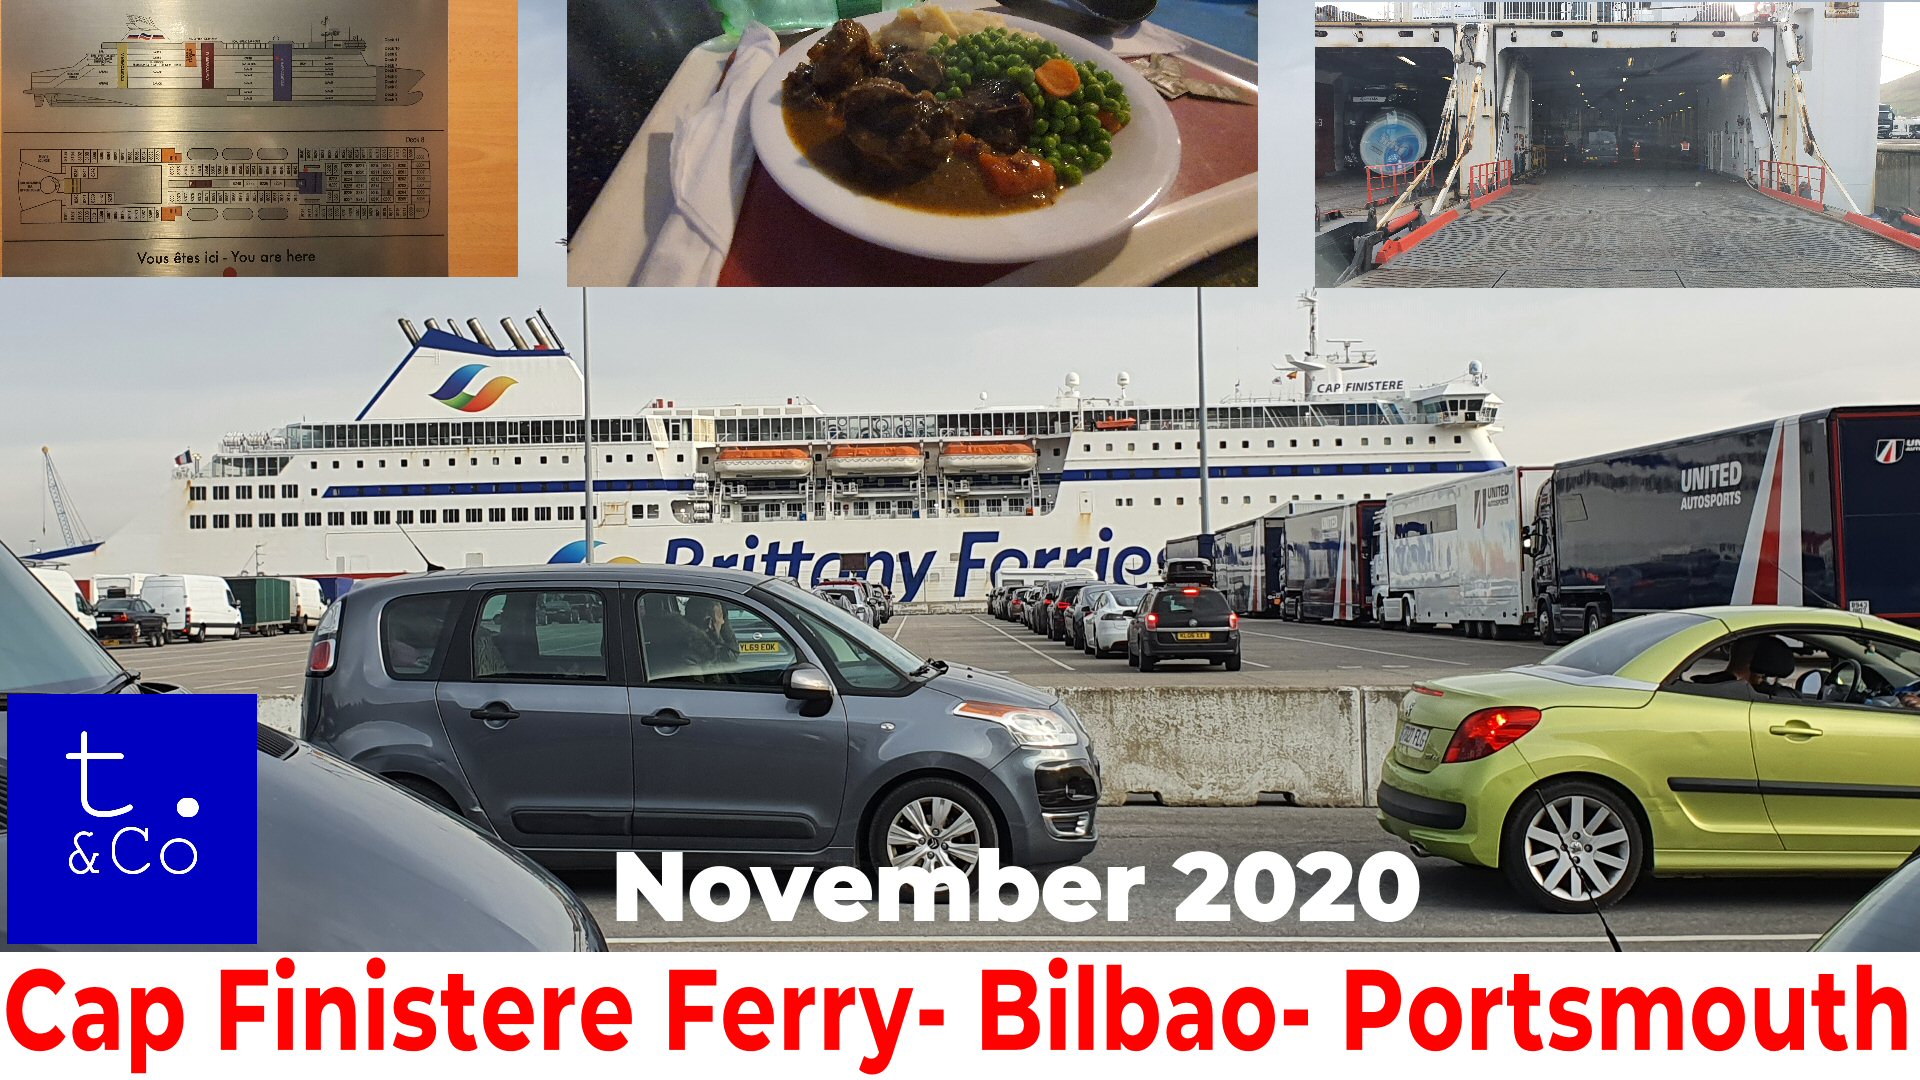 Brittany Ferries- Cap Finistere – Spain to UK